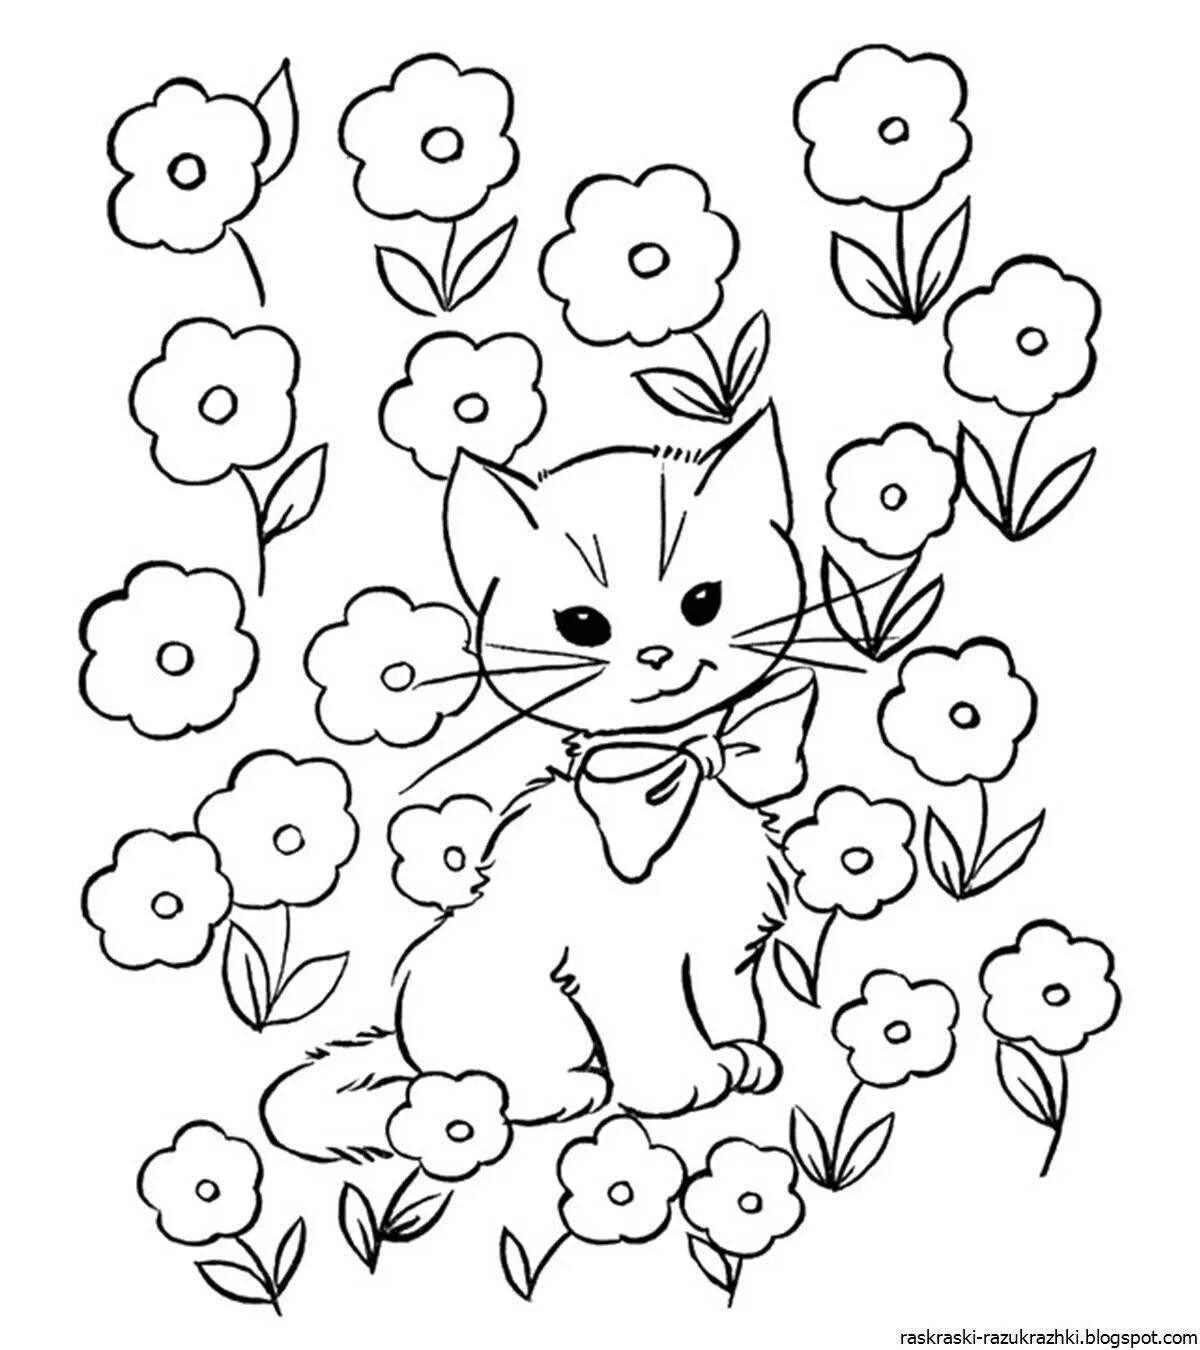 Coloring wild kittens for children 6-7 years old